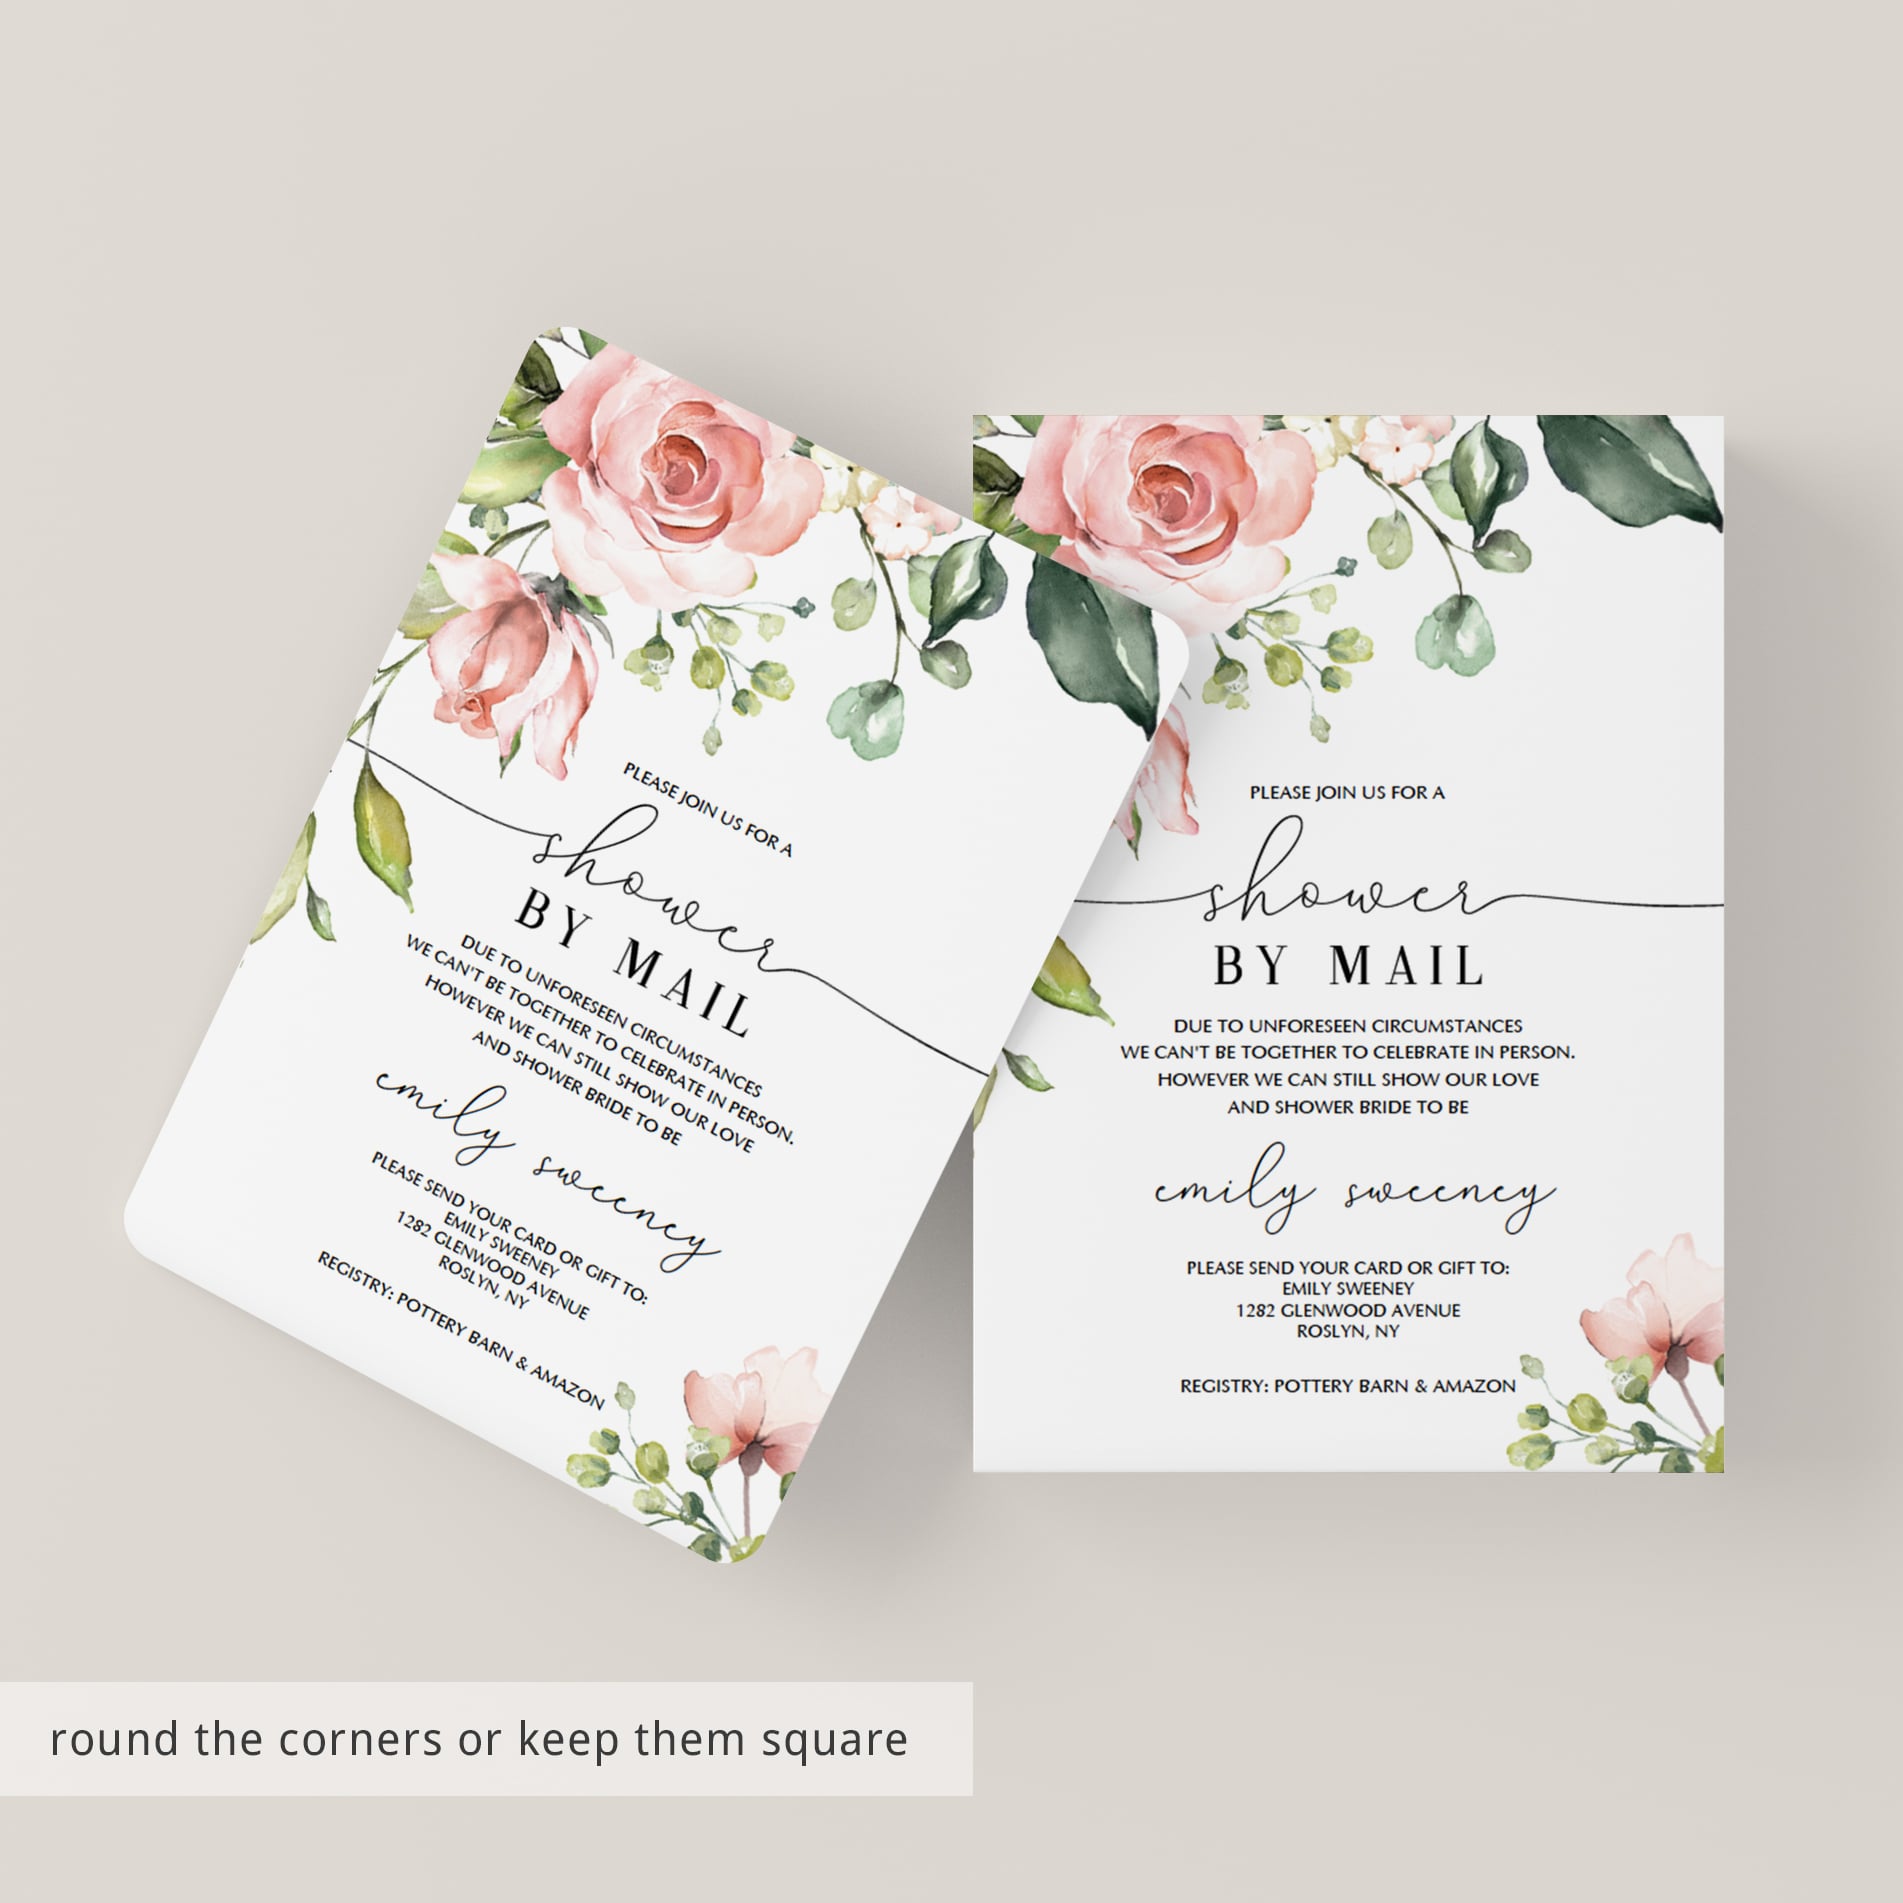 Bridal shower by mail invitation floral theme by LittleSizzle